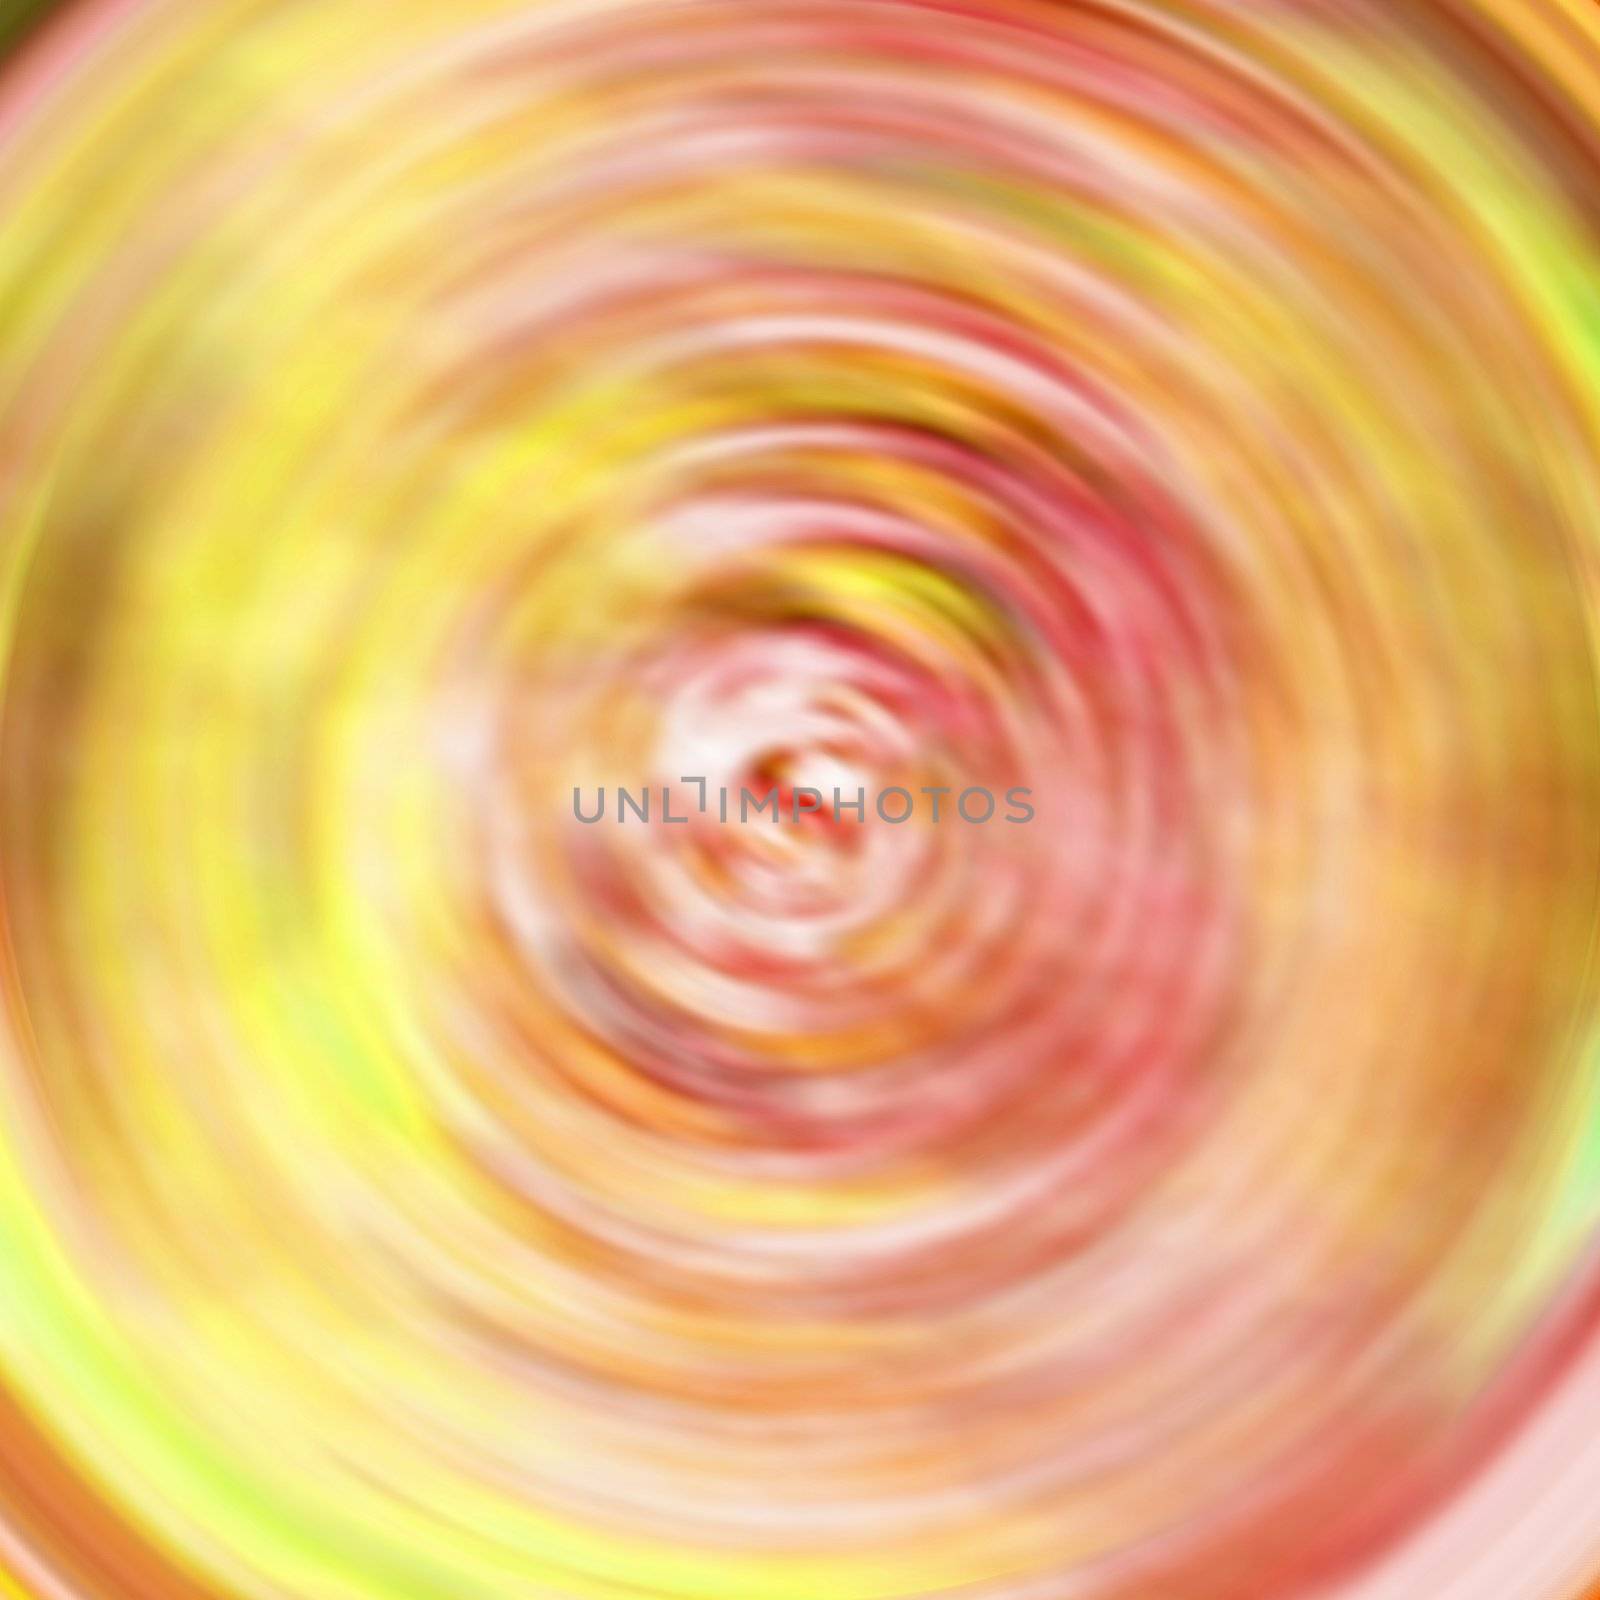 A retro tye die background with spinning motion blur.